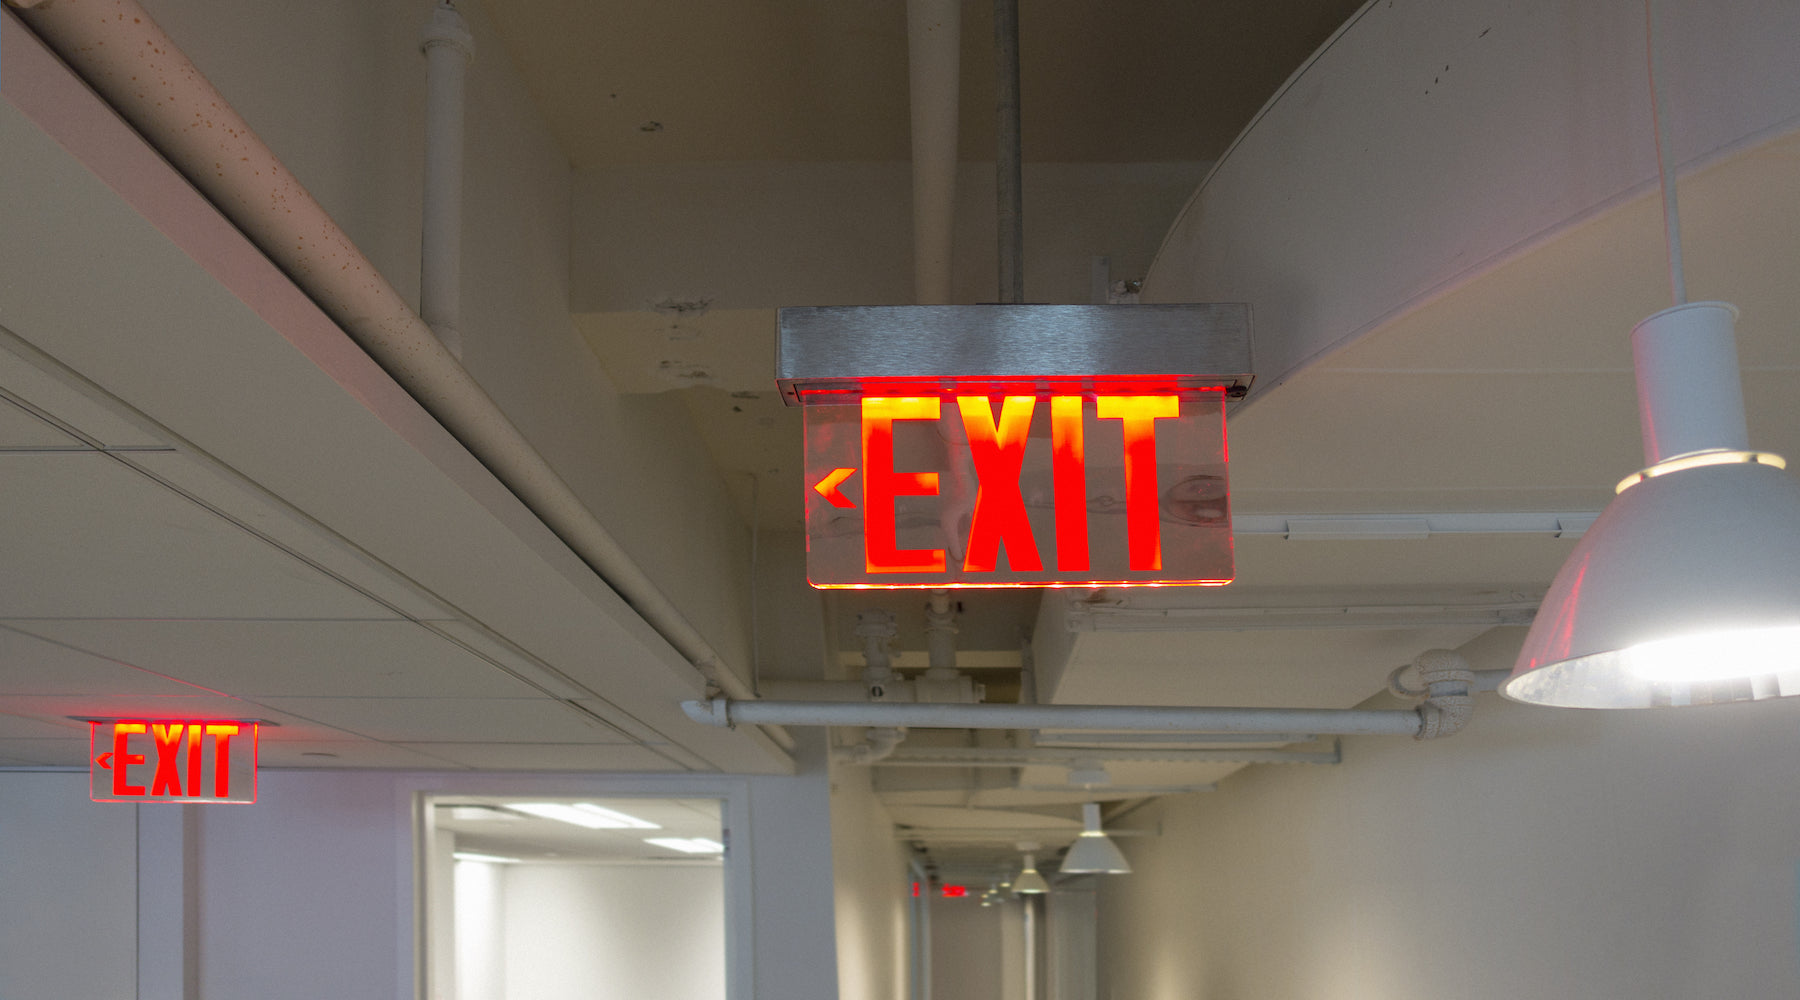 Exit emergency lighting installed in a hallway